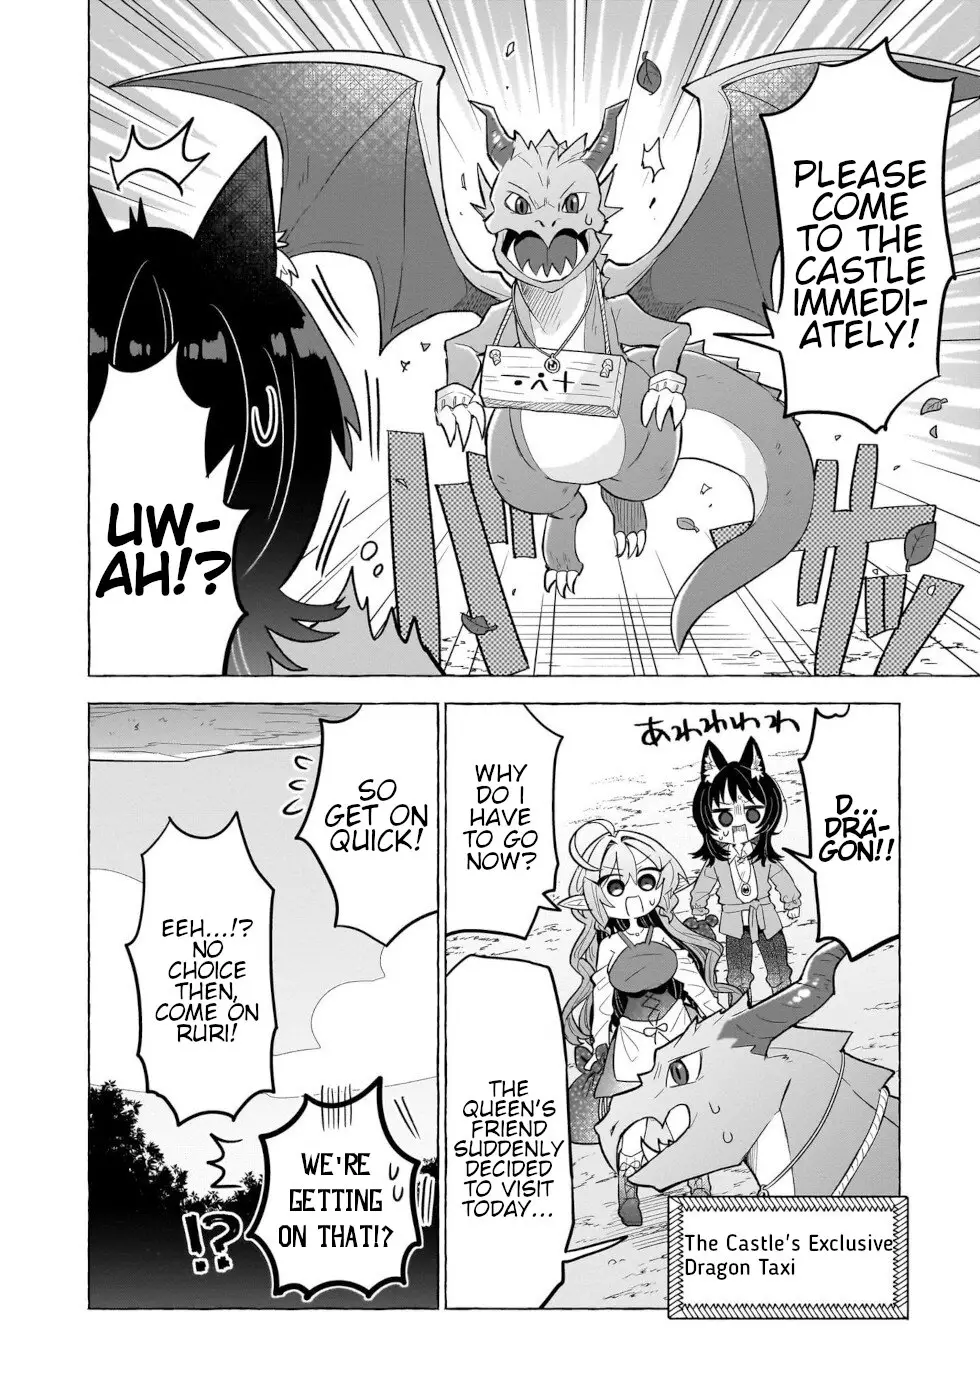 Sweets, Elf, And A High School Girl - 5 page 10-ee700bb3